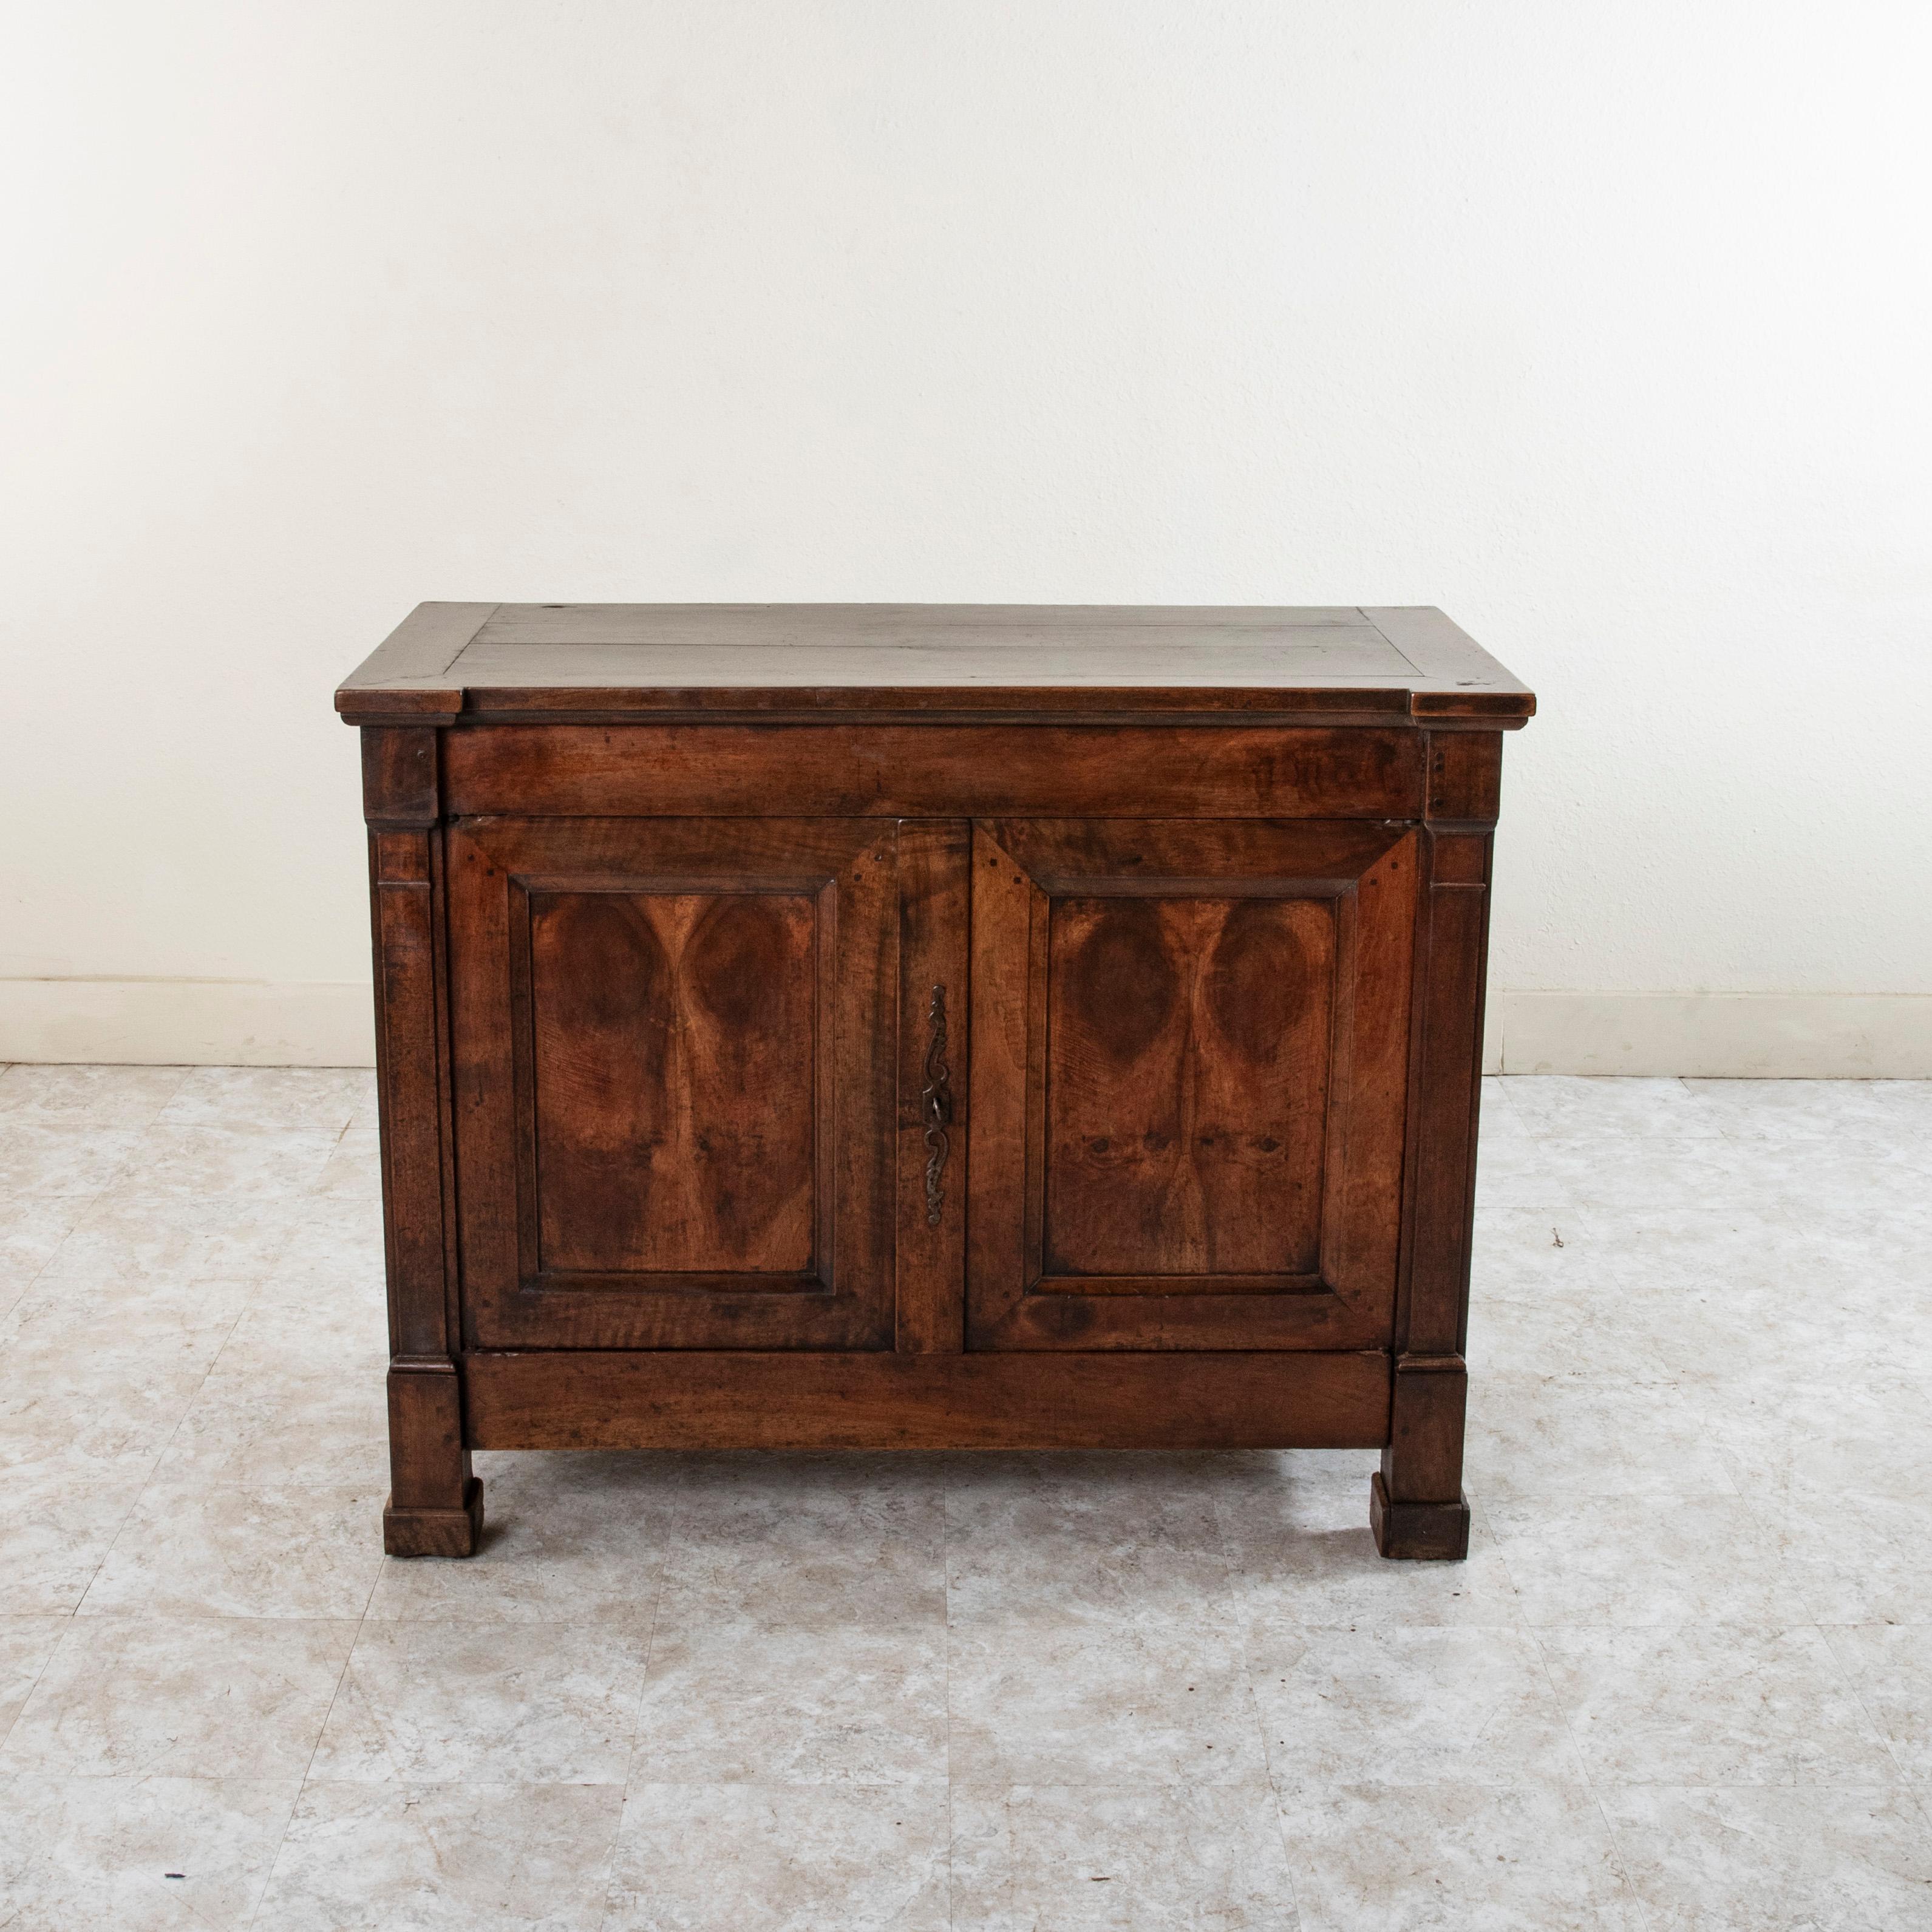 This early nineteenth century French Restauration period buffet or sideboard originally belonged to a judge in a manor house on the Rue de Carcassonne in the city of Tours. This piece features a hinged lift up top that reveals a cavity where flour